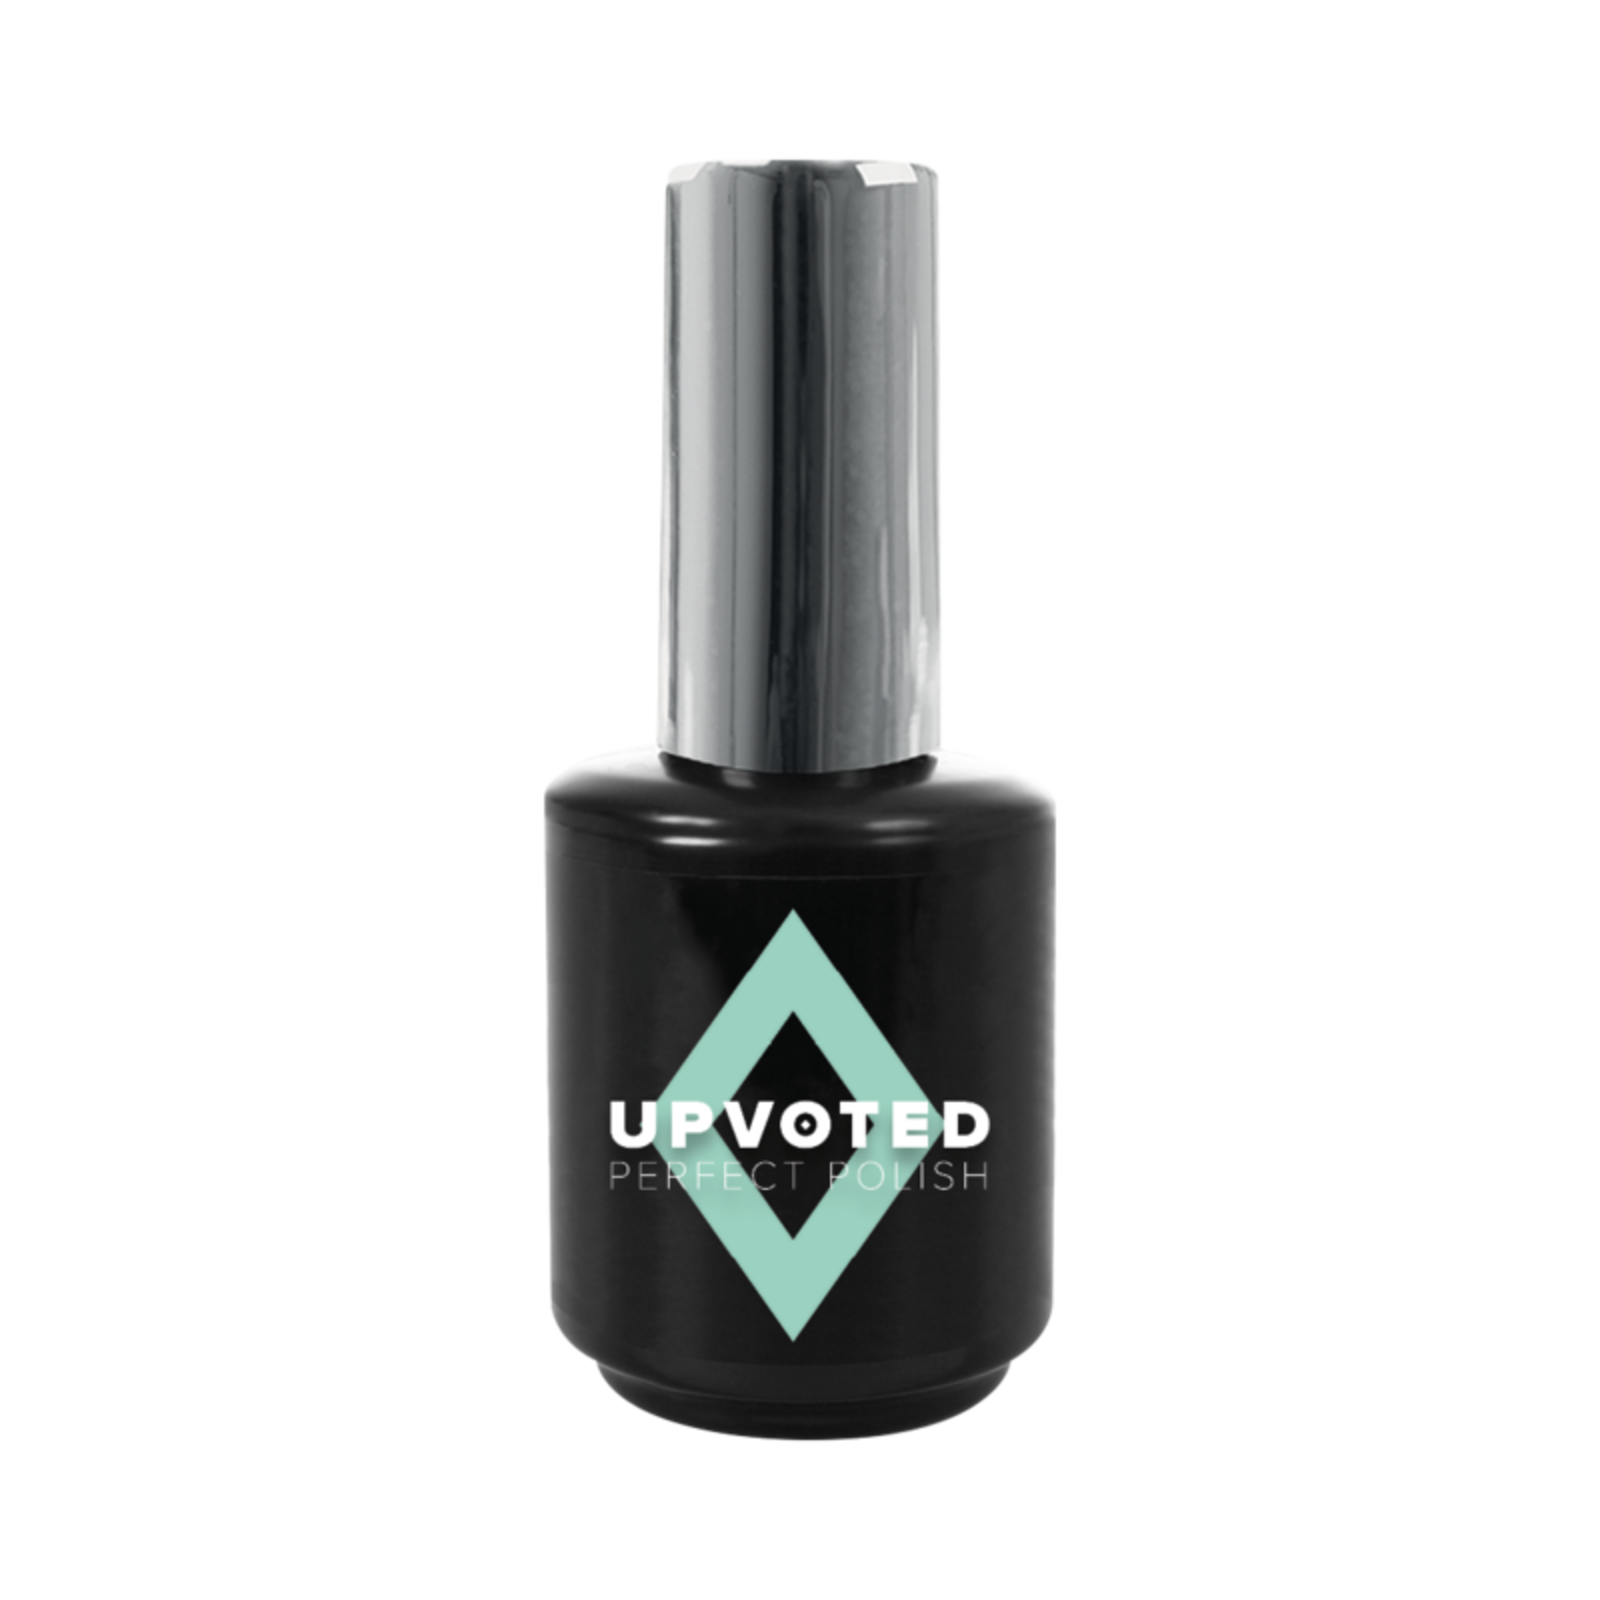 NailPerfect Upvoted #236 Envy Green 15ml